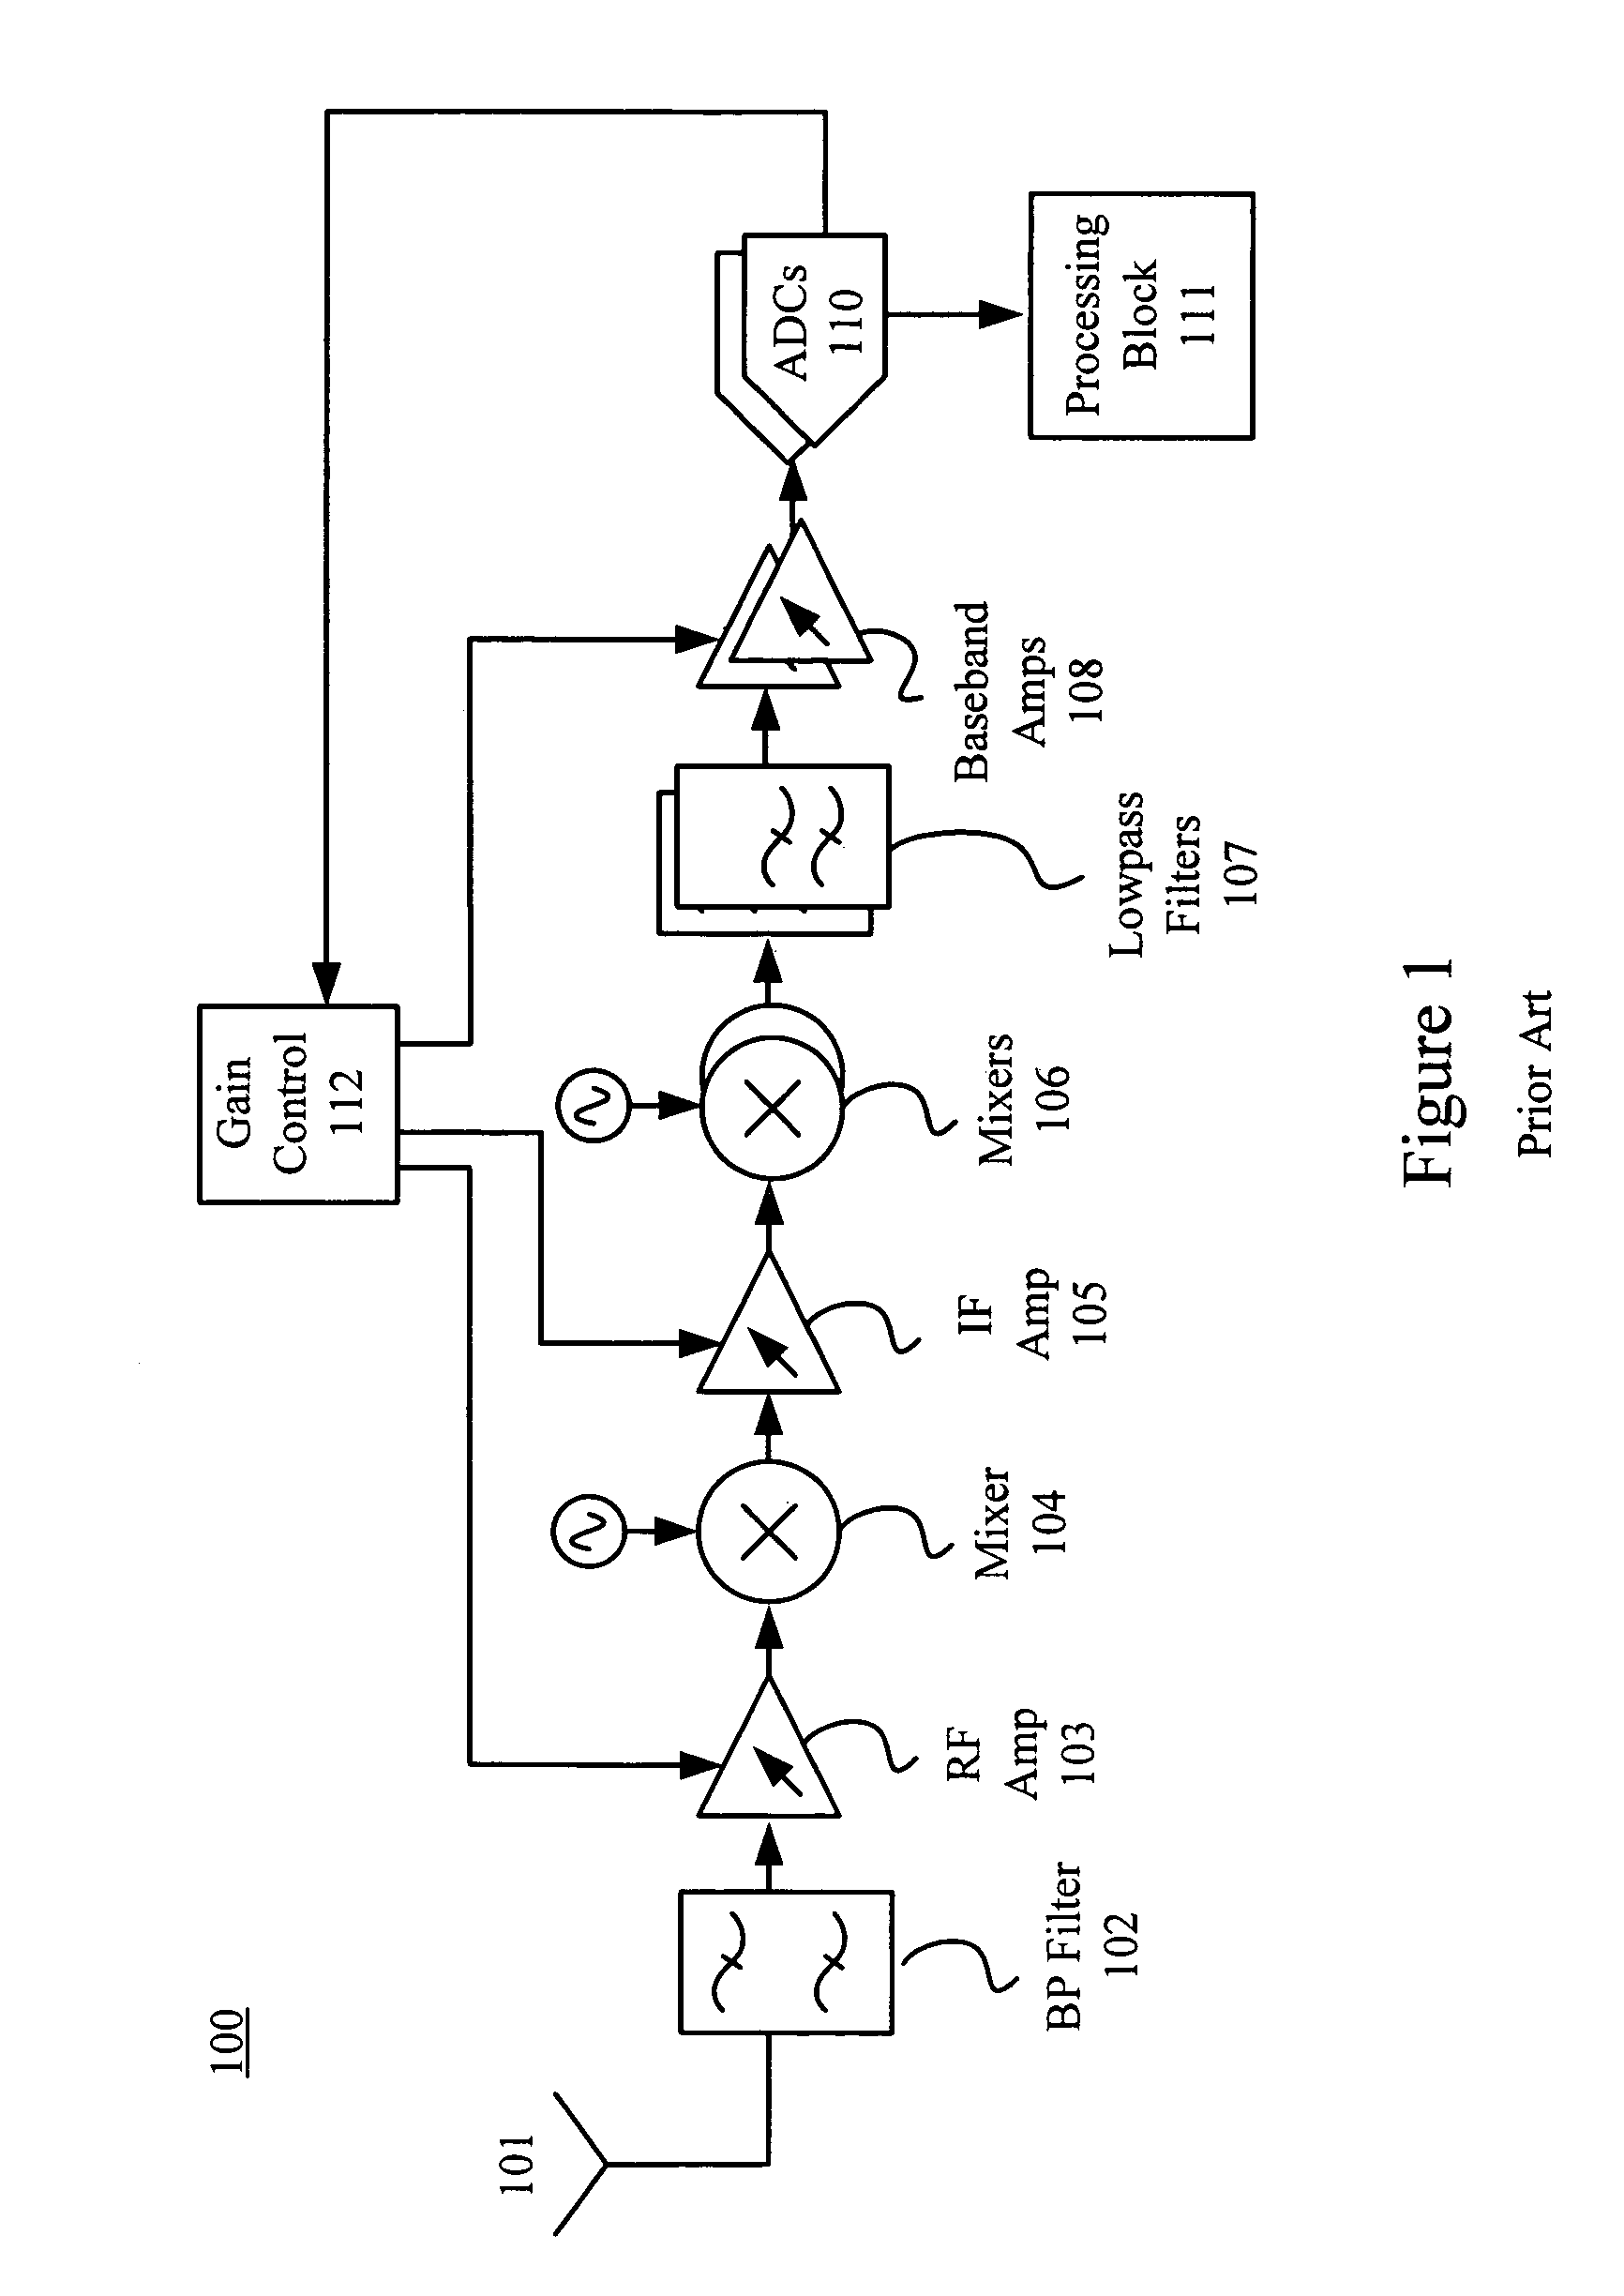 Multi-chain signal detection and gain control for automatic gain control systems